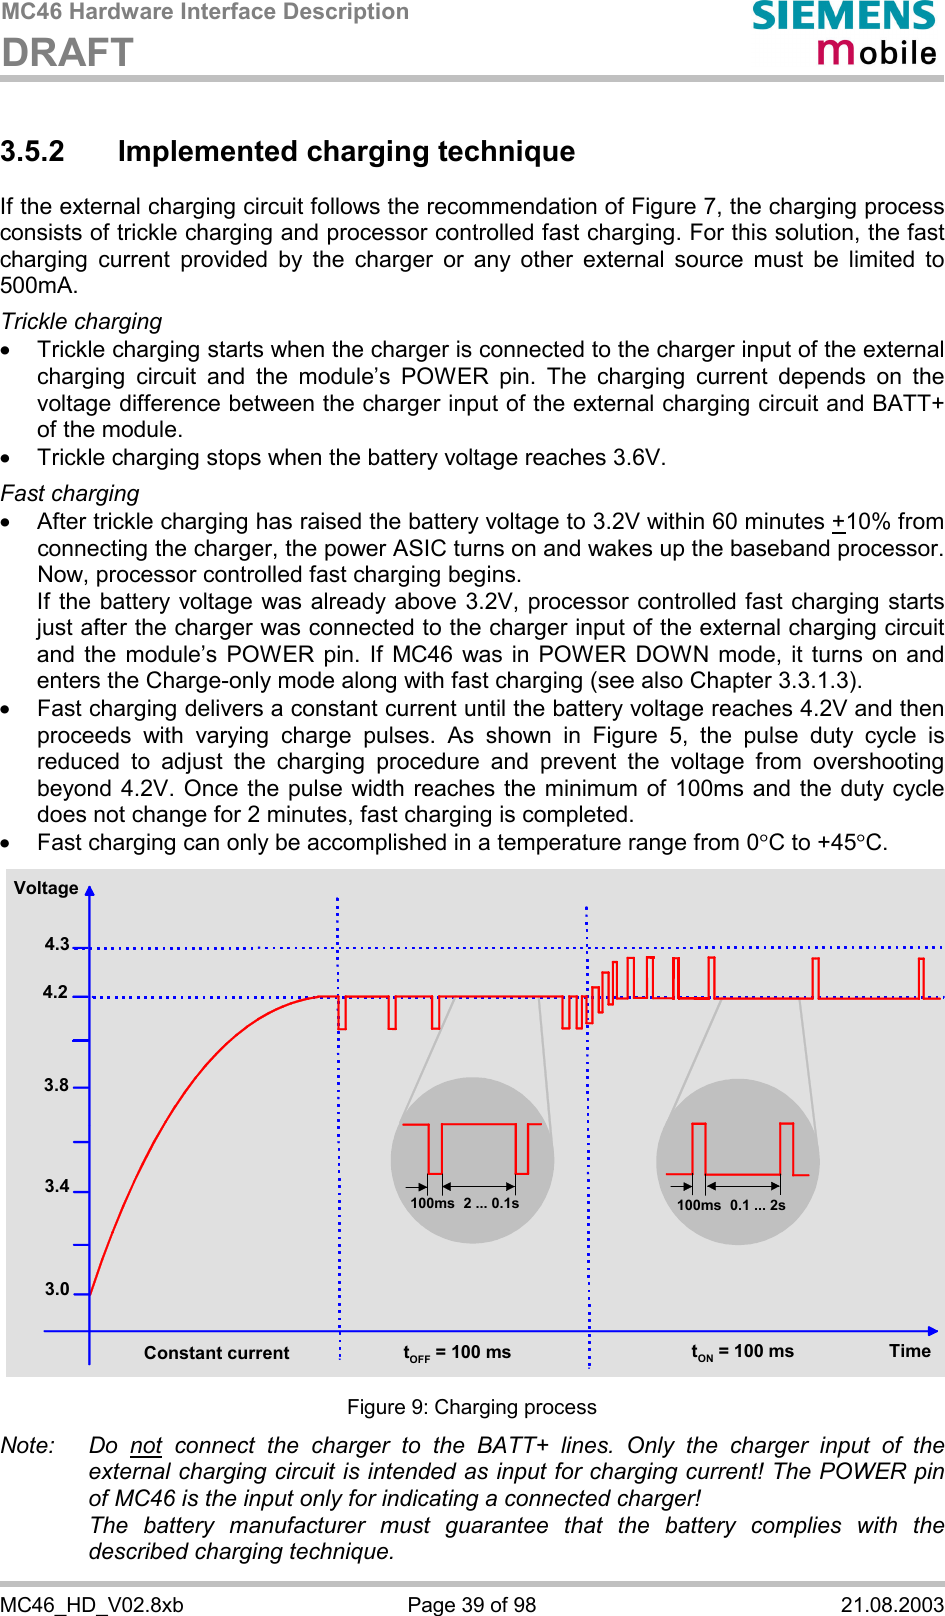 MC46 Hardware Interface Description DRAFT      MC46_HD_V02.8xb  Page 39 of 98  21.08.2003 3.5.2 Implemented charging technique If the external charging circuit follows the recommendation of Figure 7, the charging process consists of trickle charging and processor controlled fast charging. For this solution, the fast charging current provided by the charger or any other external source must be limited to 500mA.   Trickle charging ·  Trickle charging starts when the charger is connected to the charger input of the external charging circuit and the module’s POWER pin. The charging current depends on the voltage difference between the charger input of the external charging circuit and BATT+ of the module.  ·  Trickle charging stops when the battery voltage reaches 3.6V.  Fast charging  ·  After trickle charging has raised the battery voltage to 3.2V within 60 minutes +10% from connecting the charger, the power ASIC turns on and wakes up the baseband processor. Now, processor controlled fast charging begins.  If the battery voltage was already above 3.2V, processor controlled fast charging starts just after the charger was connected to the charger input of the external charging circuit and the module’s POWER pin. If MC46 was in POWER DOWN mode, it turns on and enters the Charge-only mode along with fast charging (see also Chapter 3.3.1.3). ·  Fast charging delivers a constant current until the battery voltage reaches 4.2V and then proceeds with varying charge pulses. As shown in Figure 5, the pulse duty cycle is reduced to adjust the charging procedure and prevent the voltage from overshooting beyond 4.2V. Once the pulse width reaches the minimum of 100ms and the duty cycle does not change for 2 minutes, fast charging is completed. ·  Fast charging can only be accomplished in a temperature range from 0°C to +45°C.  4.34.23.8Voltage3.43.0Constant current tOFF = 100 ms tON = 100 ms Time100ms 2 ... 0.1s 100ms 0.1 ... 2s  Figure 9: Charging process Note: Do not connect the charger to the BATT+ lines. Only the charger input of the external charging circuit is intended as input for charging current! The POWER pin of MC46 is the input only for indicating a connected charger!   The battery manufacturer must guarantee that the battery complies with the described charging technique.  